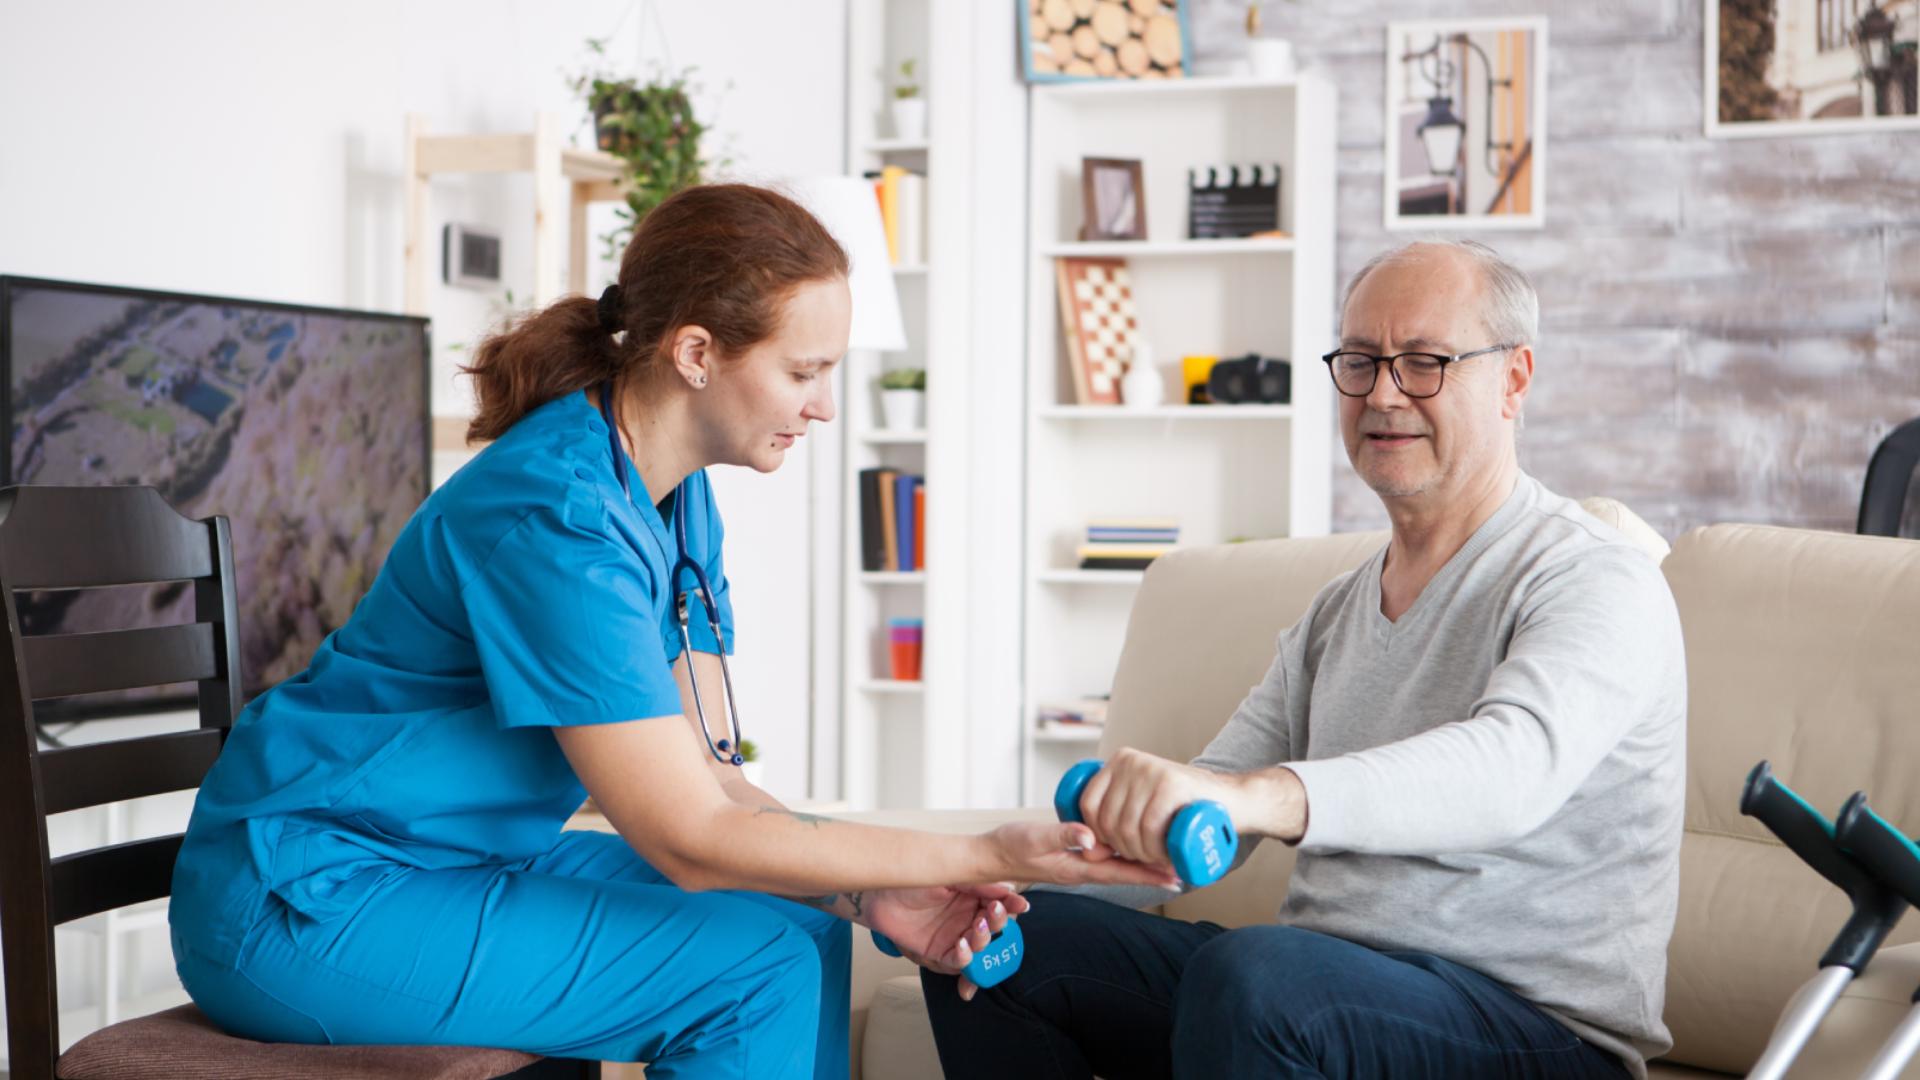 home visits for physiotherapist